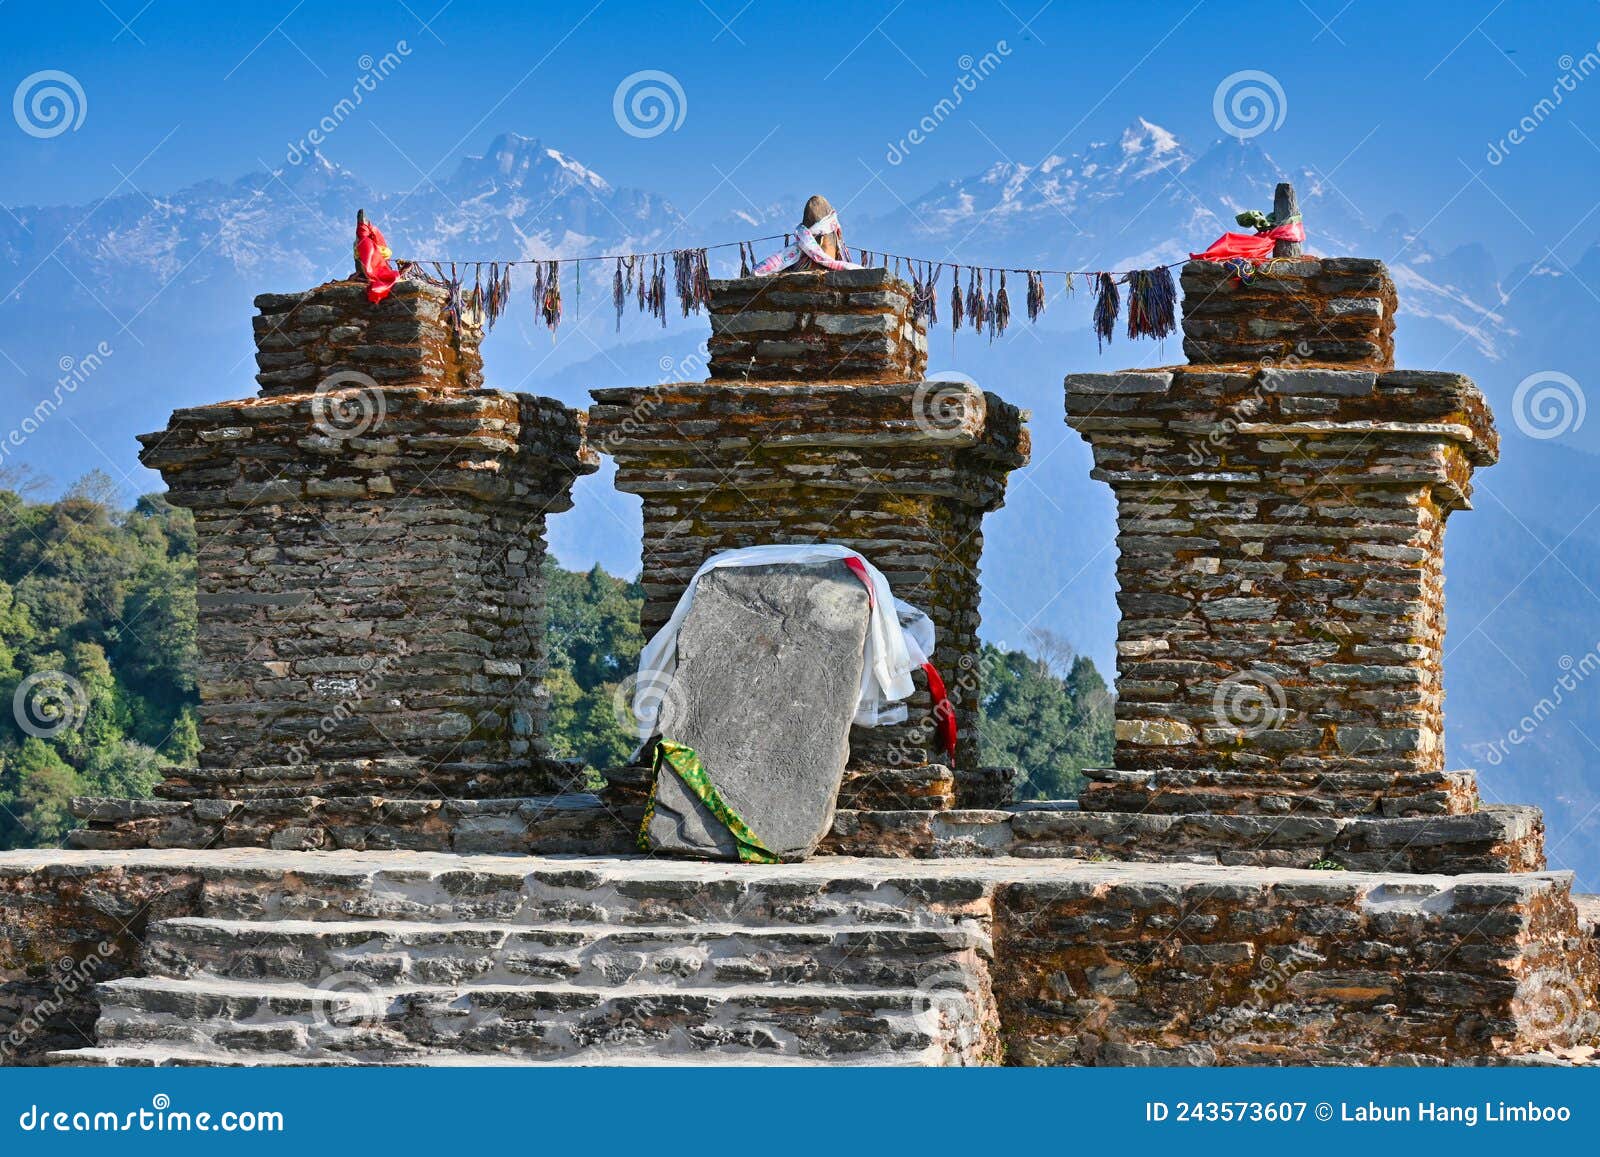 Picture of buddhist stupa from Pelling